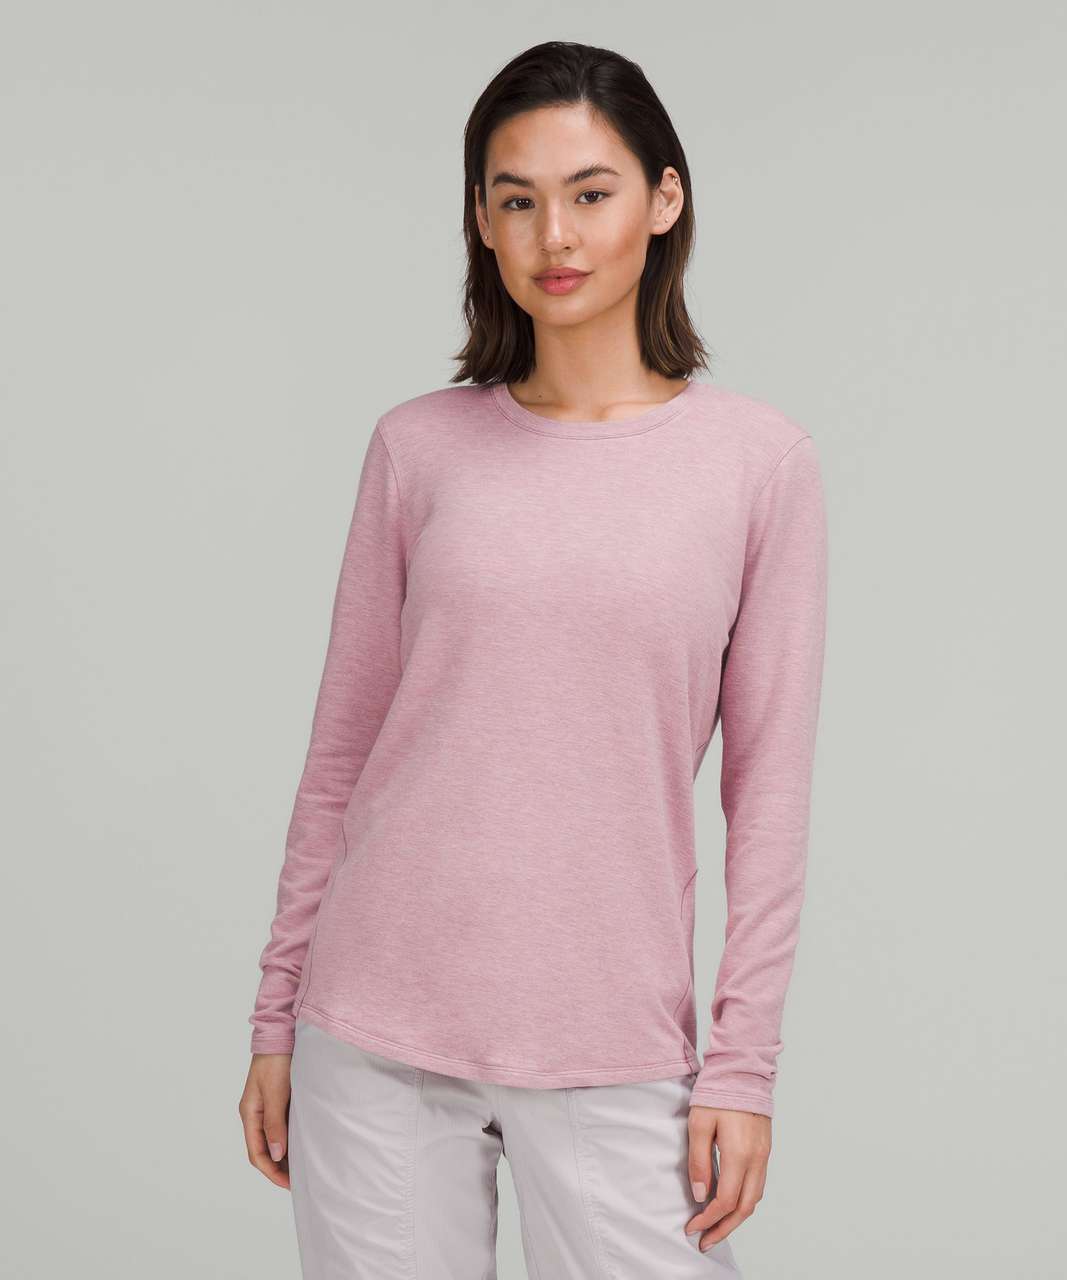 Lululemon Women's Sz. 2 Do the Twist Long Sleeve Top In Pink Taupe NWT